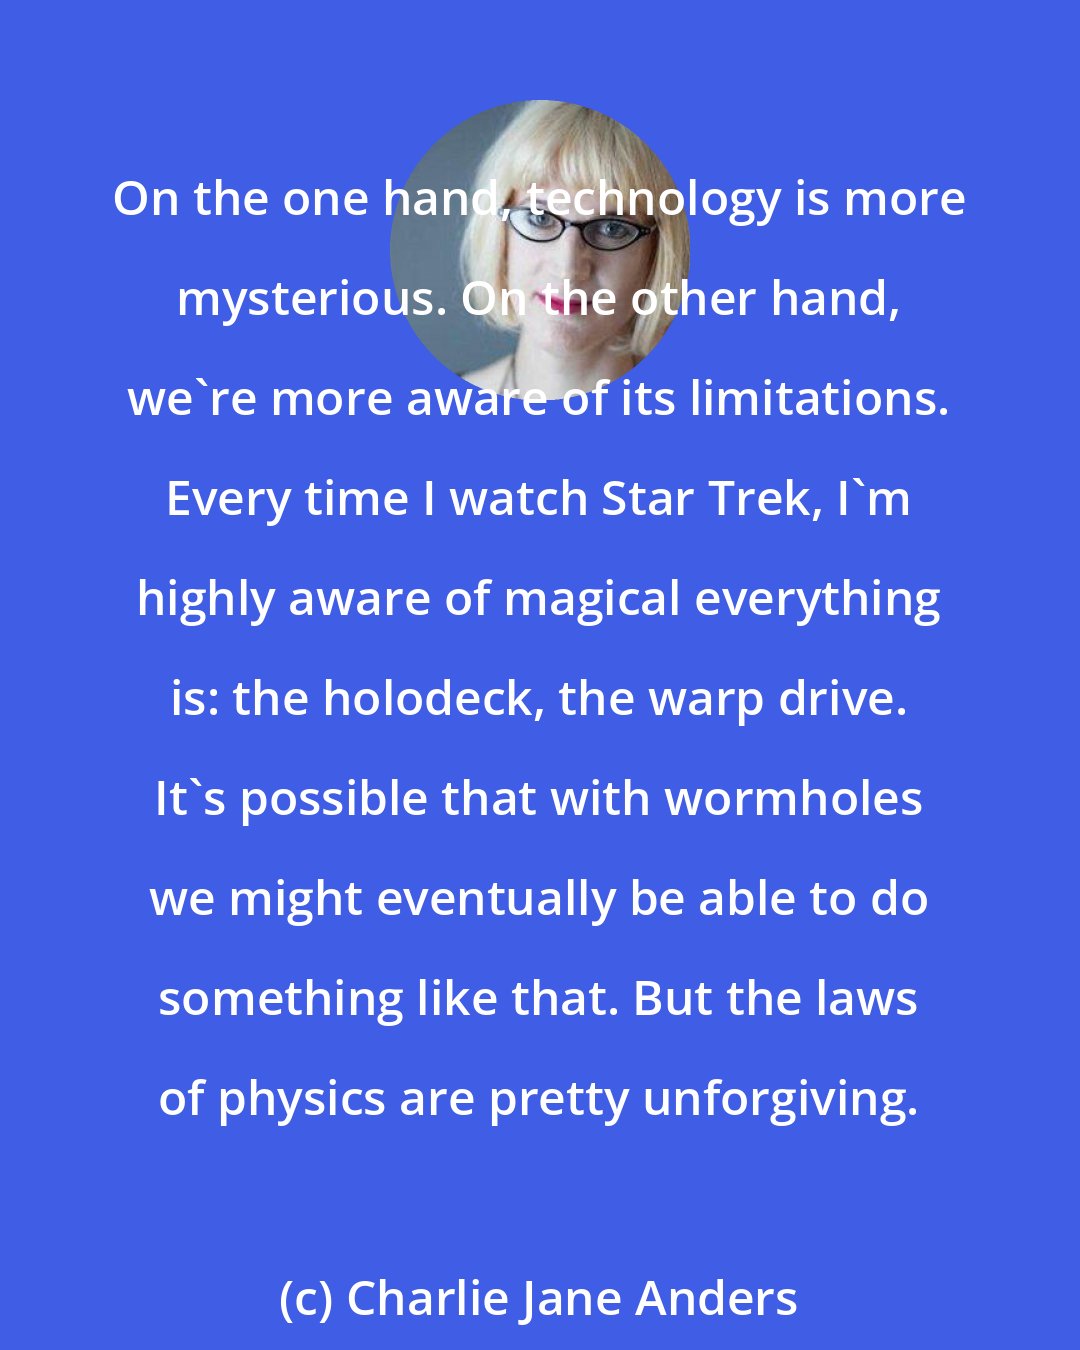 Charlie Jane Anders: On the one hand, technology is more mysterious. On the other hand, we're more aware of its limitations. Every time I watch Star Trek, I'm highly aware of magical everything is: the holodeck, the warp drive. It's possible that with wormholes we might eventually be able to do something like that. But the laws of physics are pretty unforgiving.